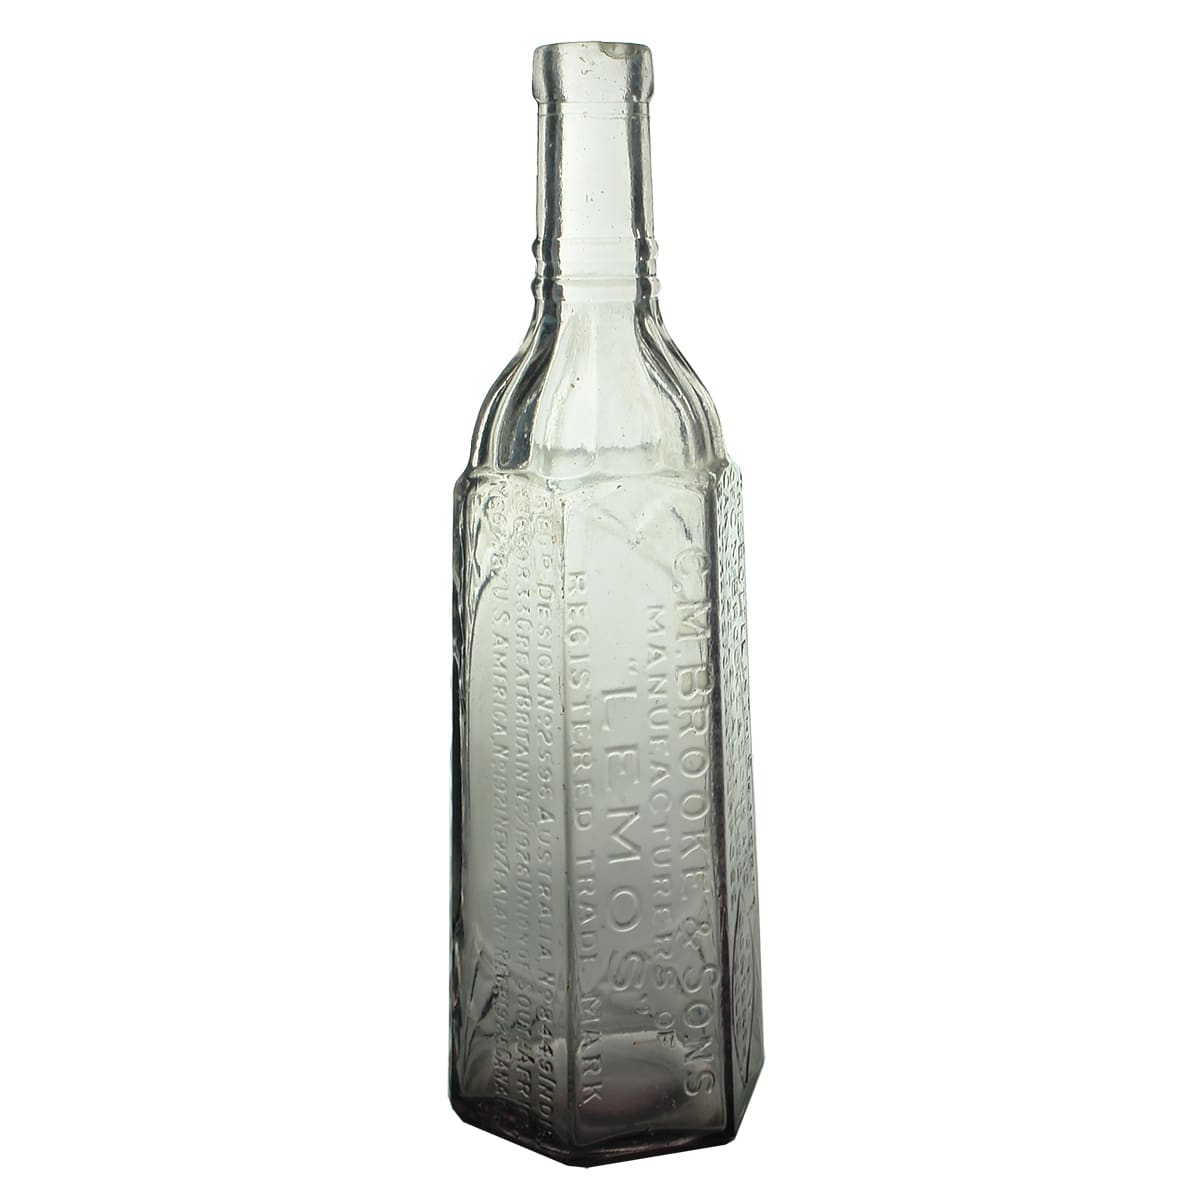 Cordial. Brooke & Sons. Lemos. Multiple countries listed for the registered design of the bottle. Light sun coloured amethyst. 26 oz.